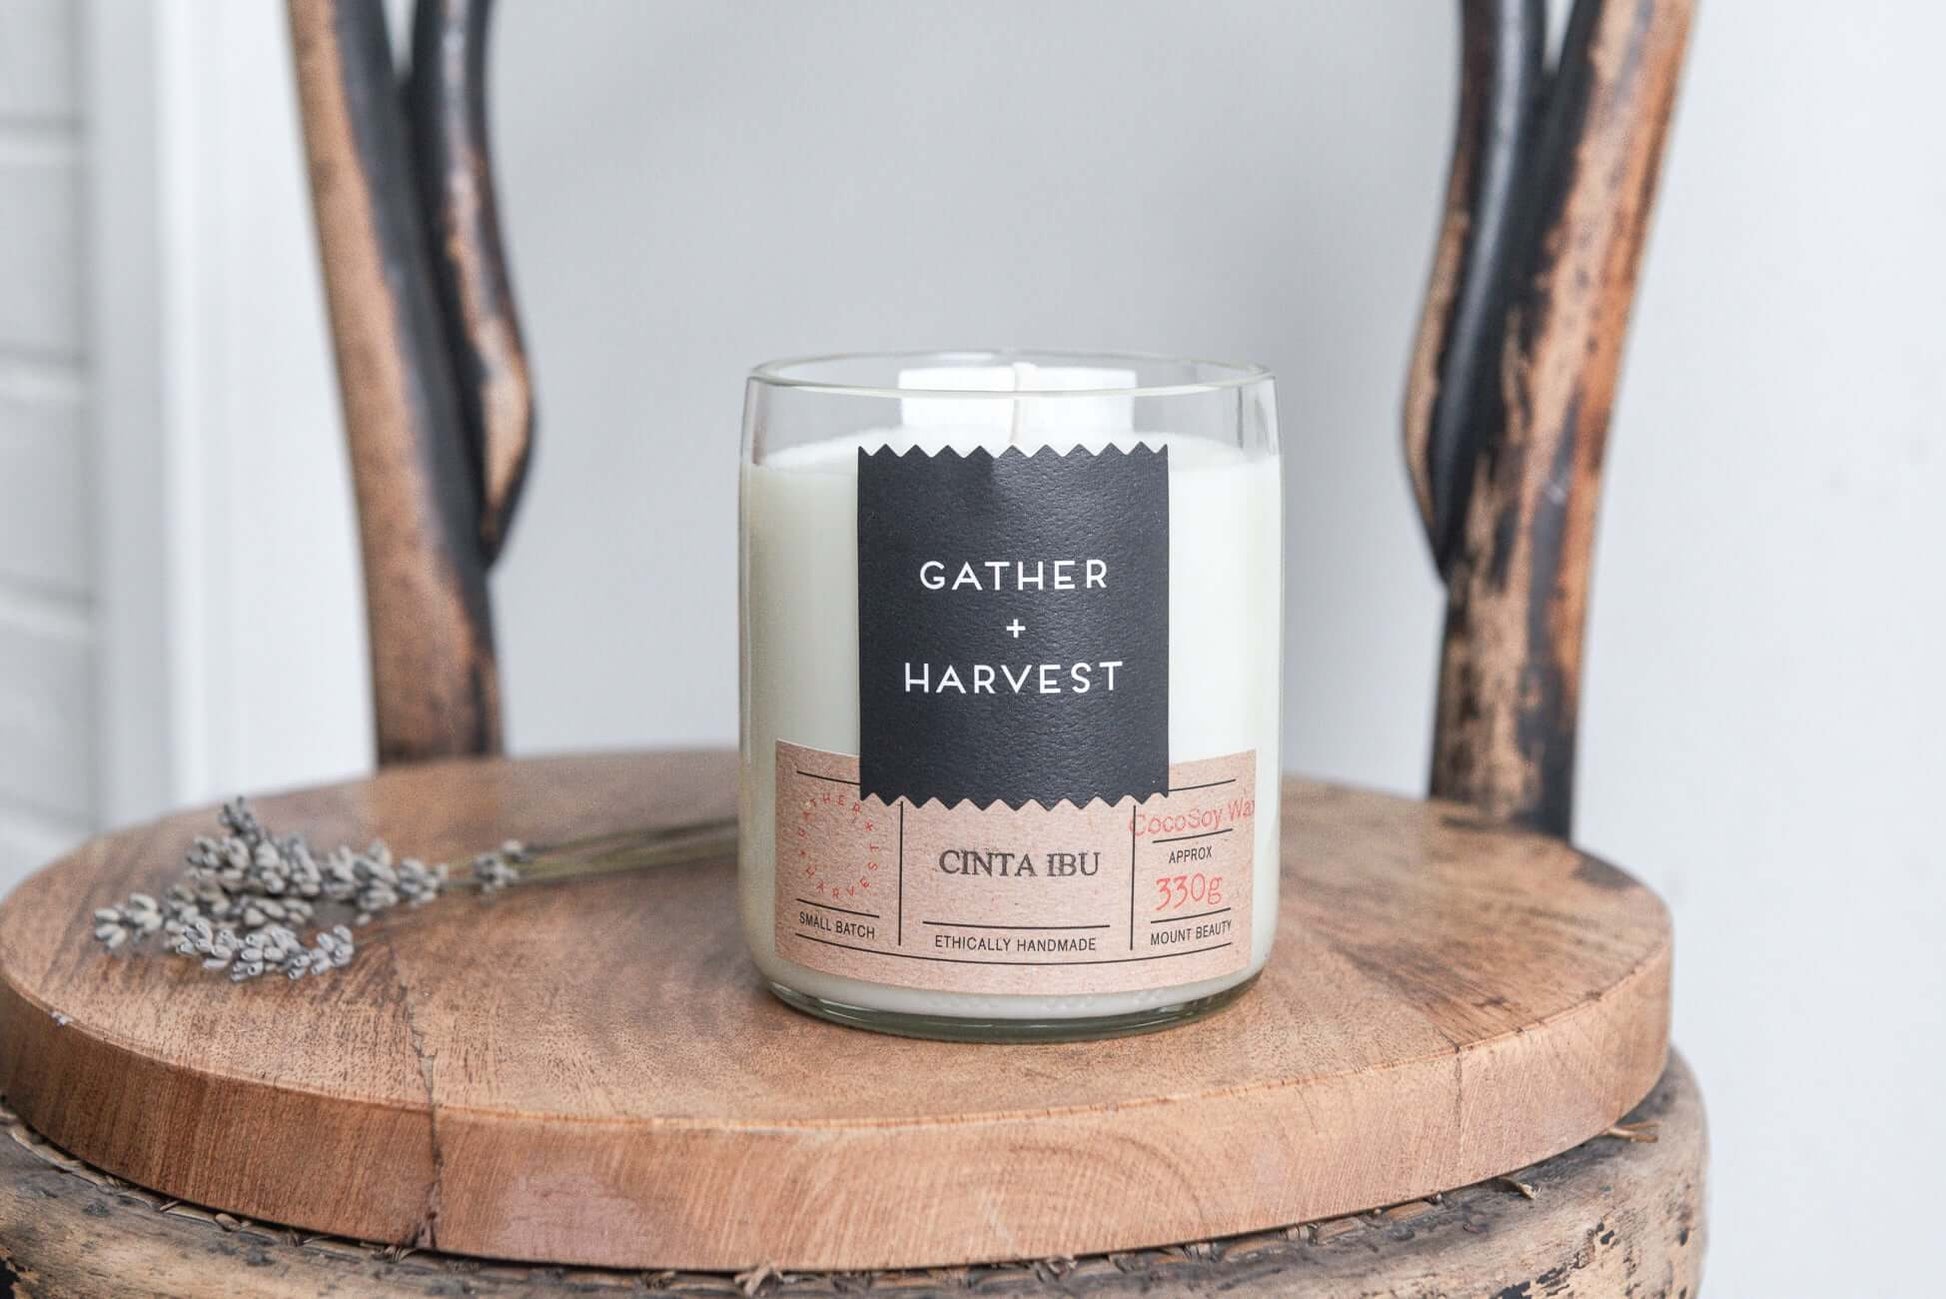 The Handmade Cocosoy Mother's Day Candle Cinta Ibu  is ethically made in Mt Beauty as part of a small batch